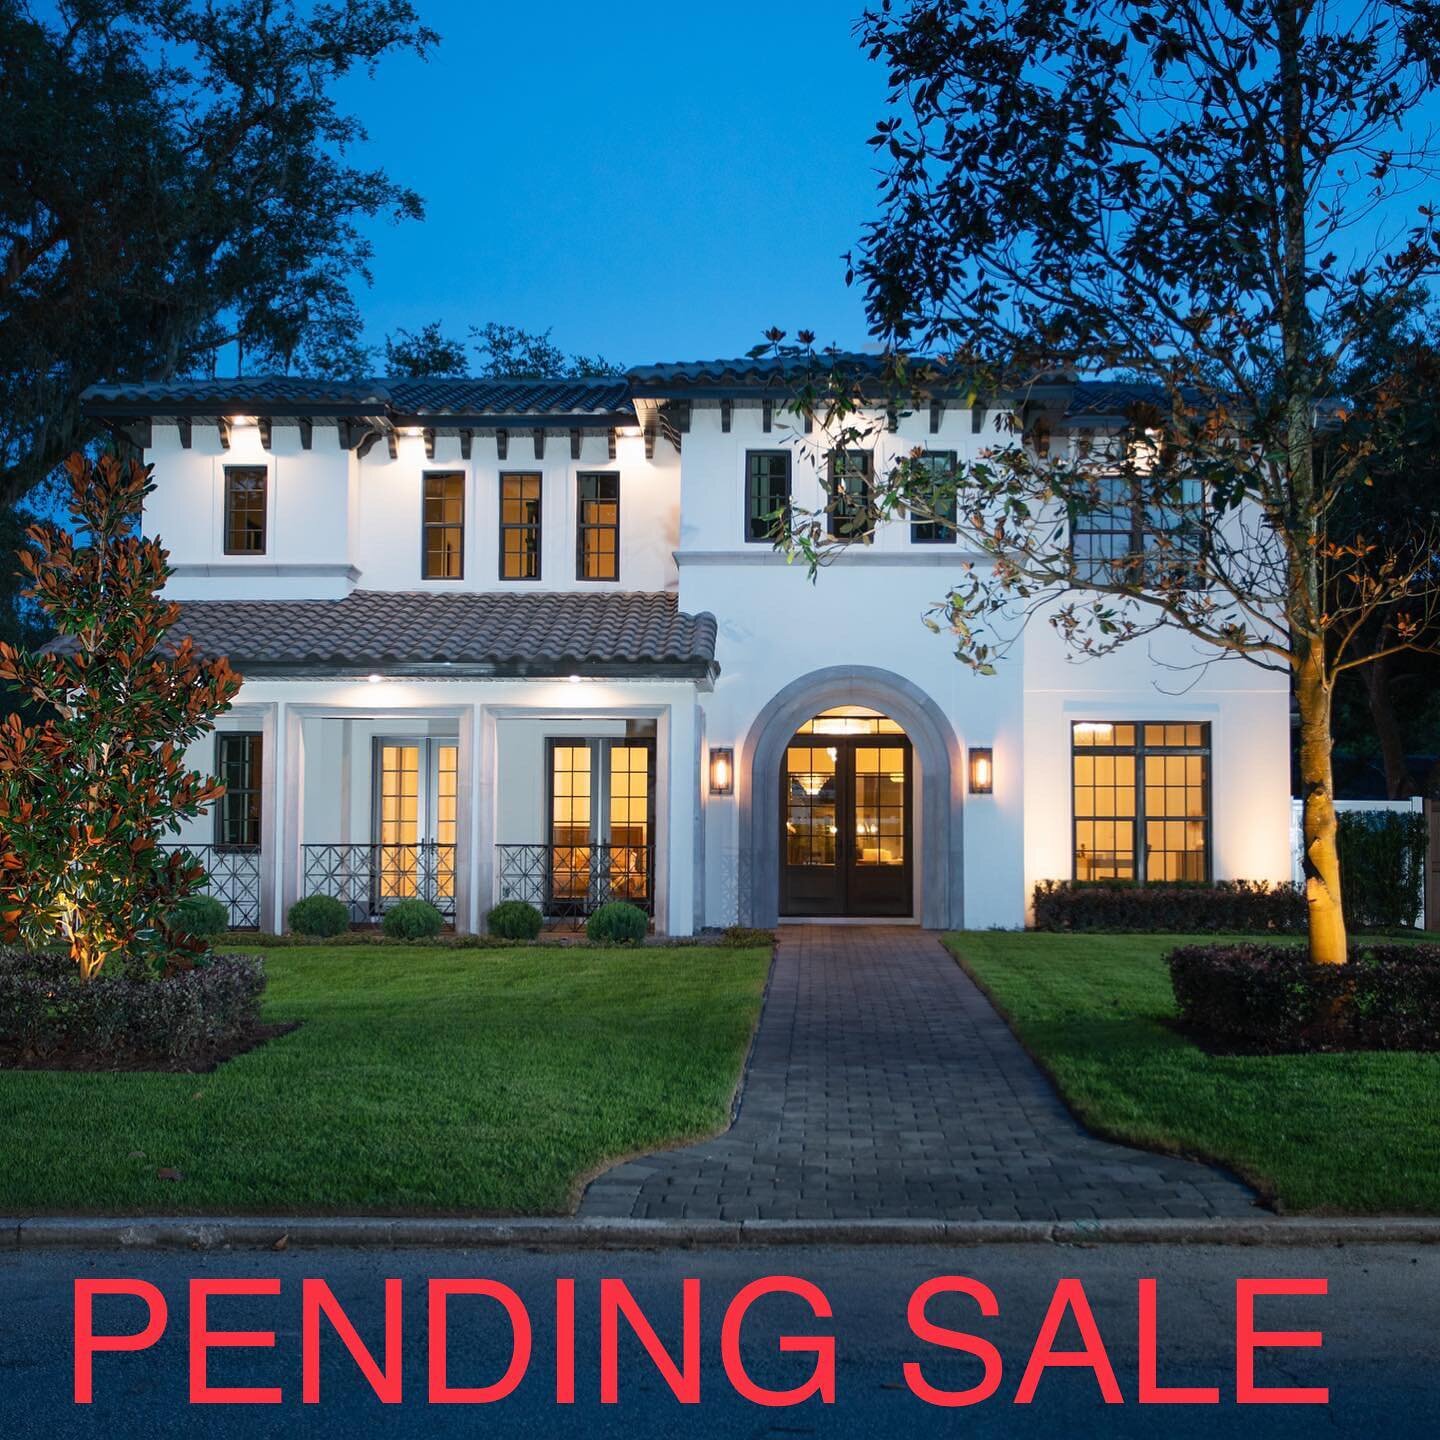 SALE PENDING - 3 DAYS ON MARKET

It is my pleasure to announce the pending sale of IL FENICE! Upon launching our design/build on the market, we instantly were in a multiple offer situation. Being that this is our inaugural design/build, this will be 